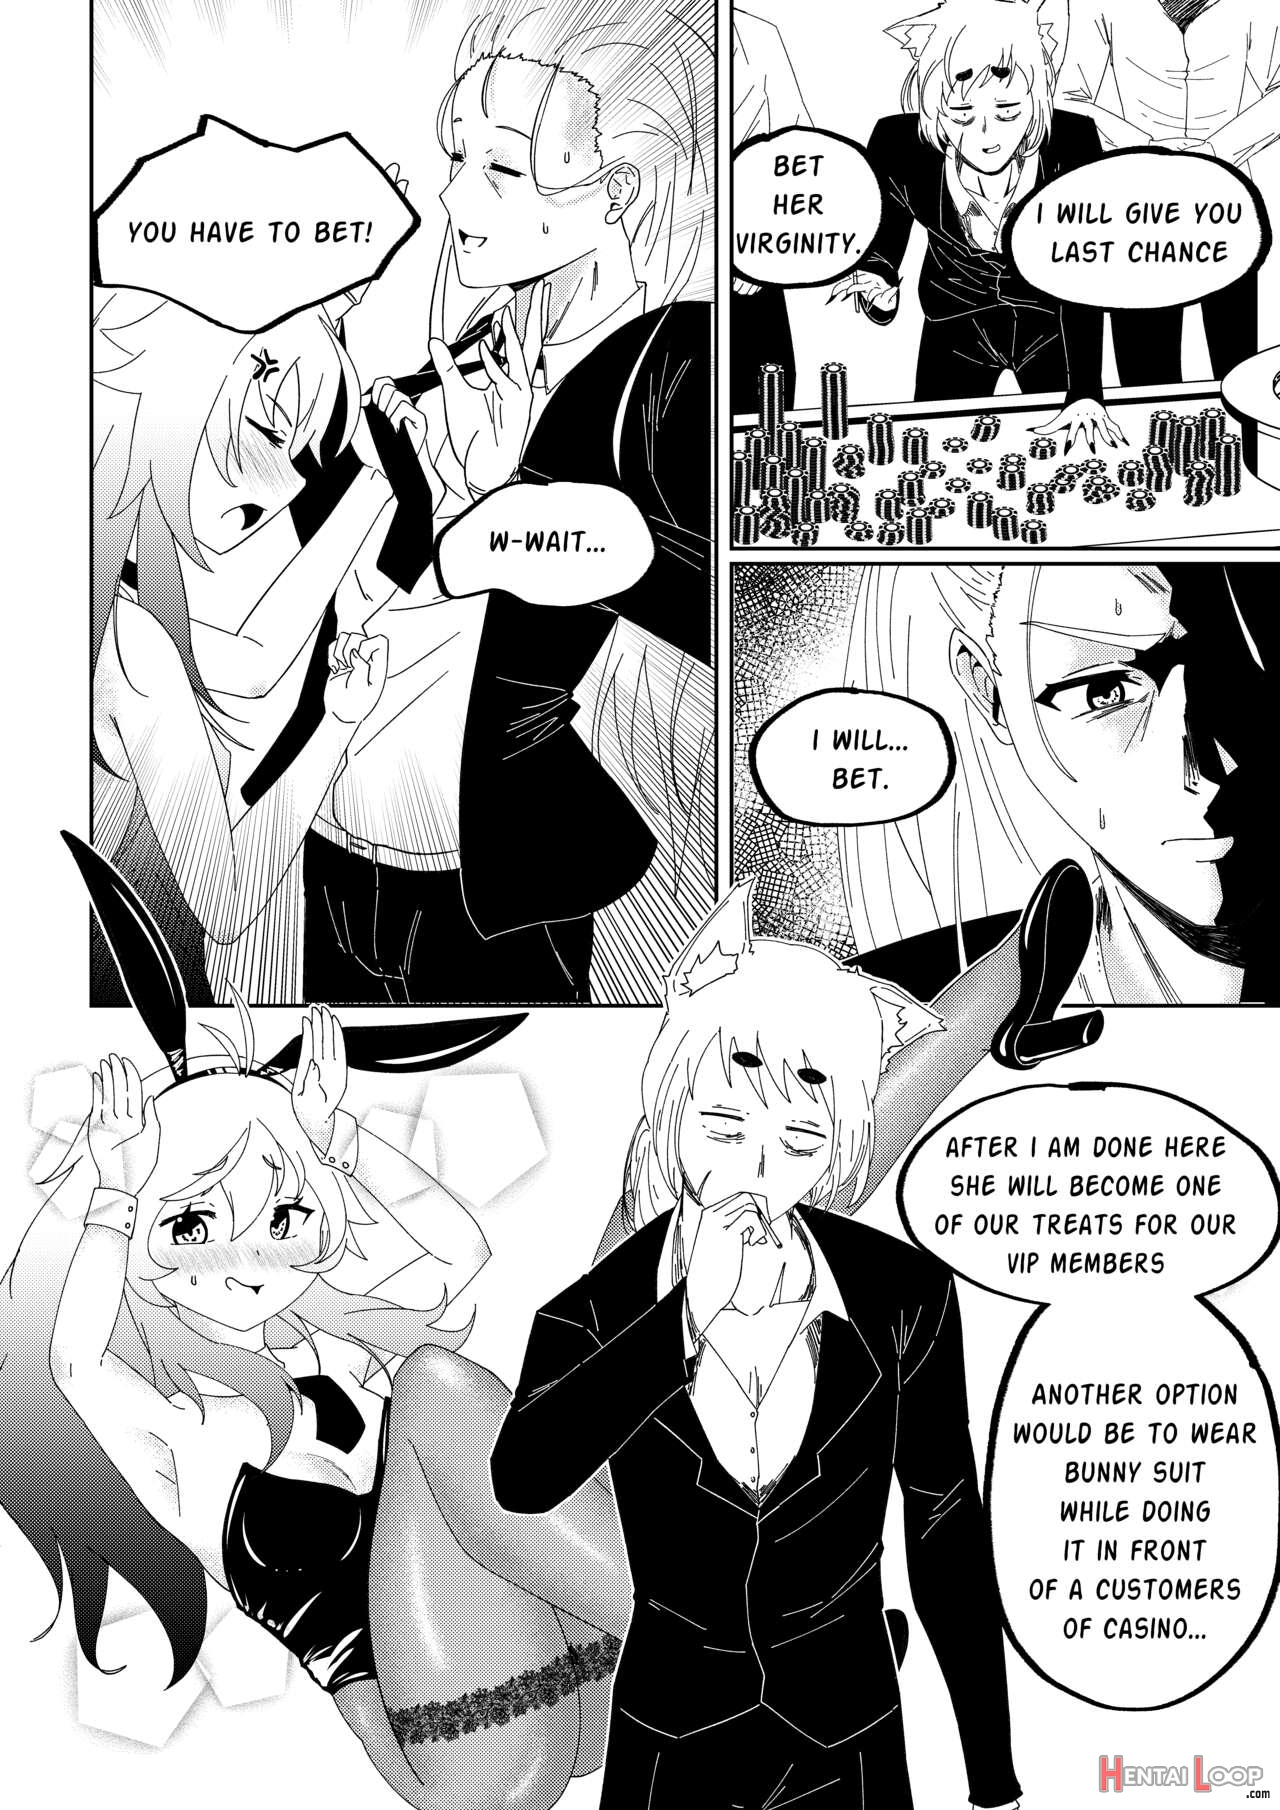 A Night At A Casino page 4